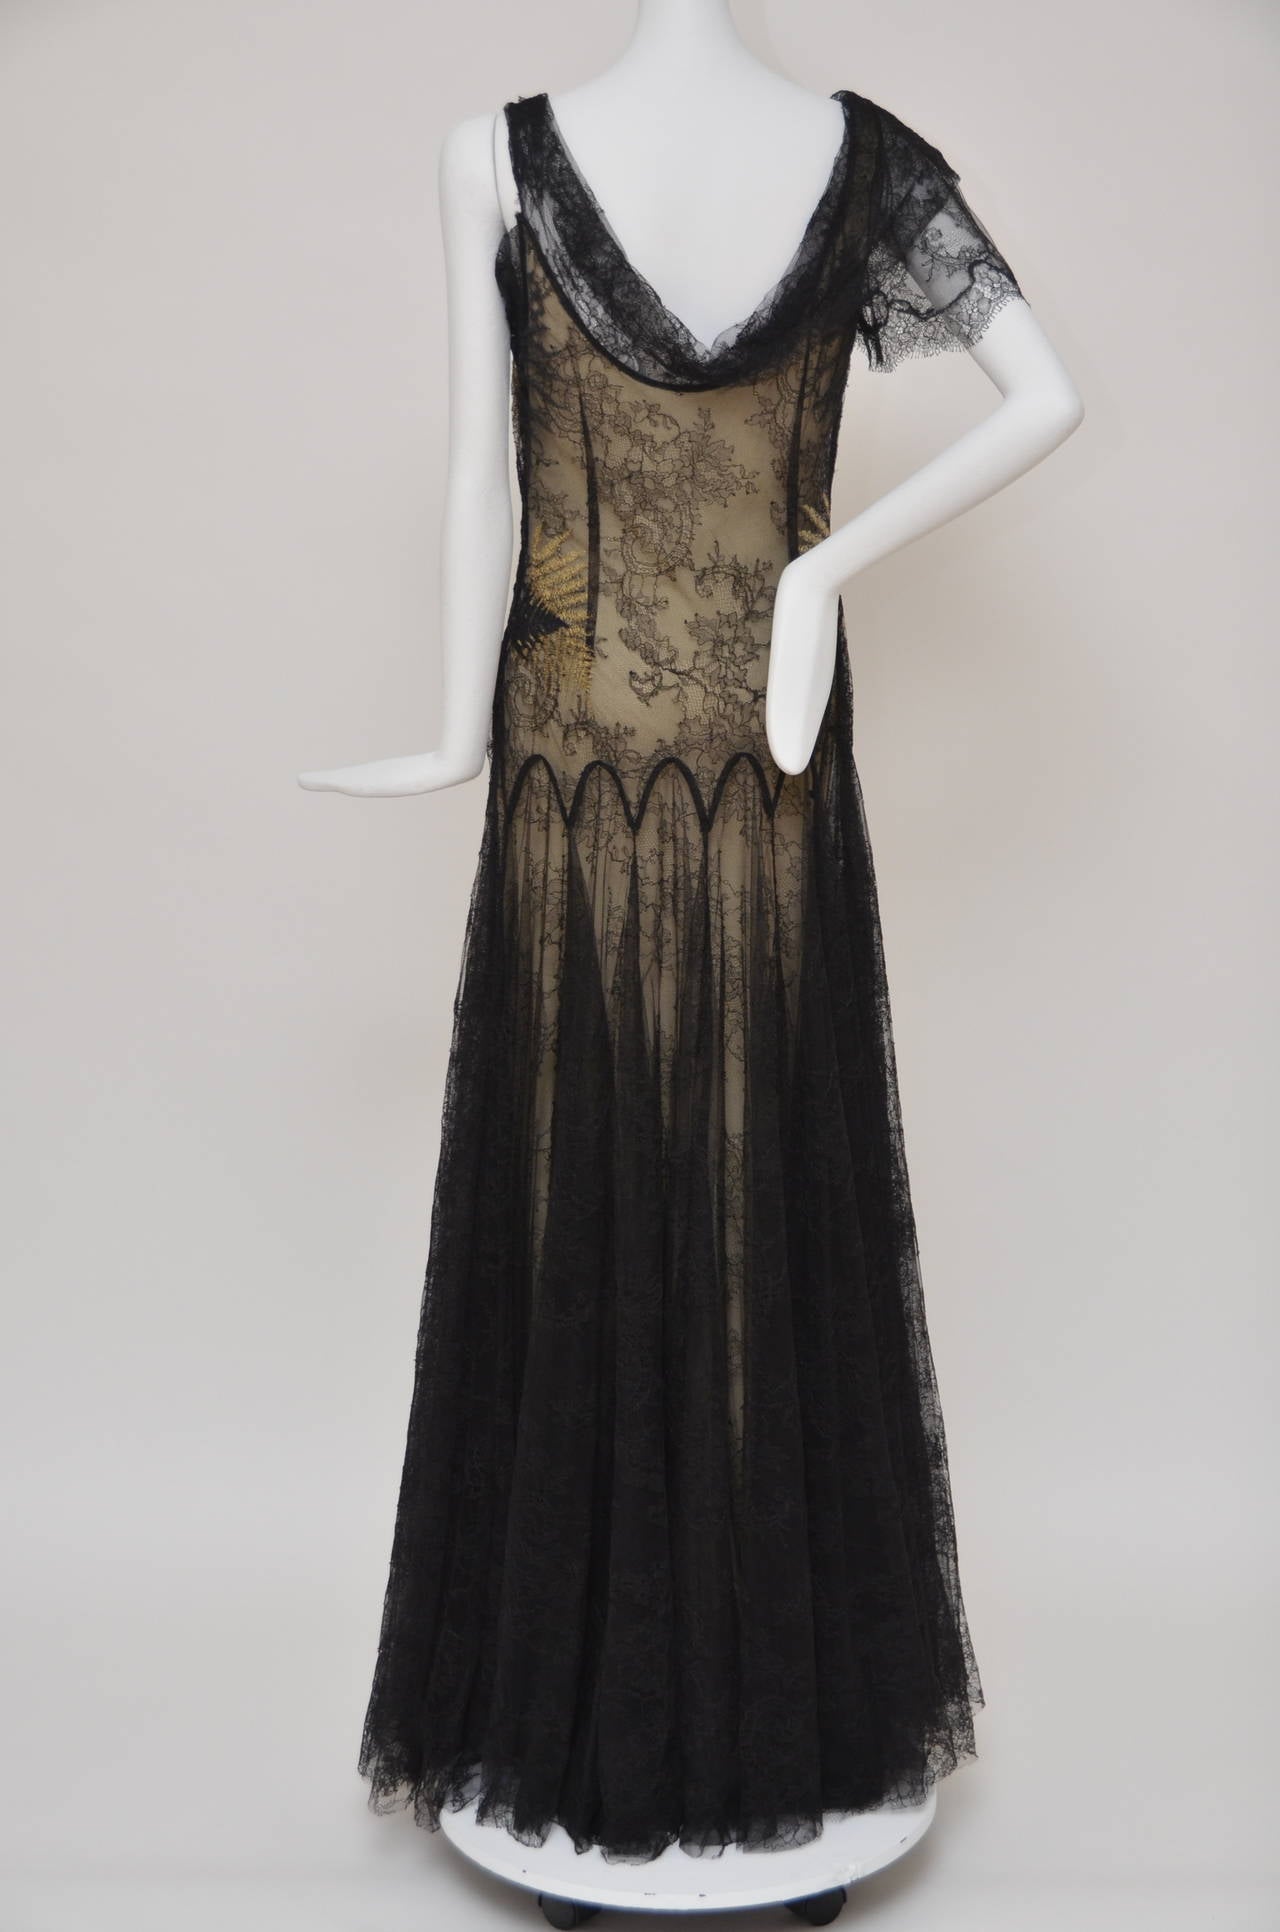 Alexander McQueen sleeveless lace evening gown with upper bodice gathers, scoop neckline, one short flutter sleeve, flare circle hem.Nude silk lining.
Metallic gold leaf embroidery on the top part of the dress.
Condition: Excellent ,like new,looks